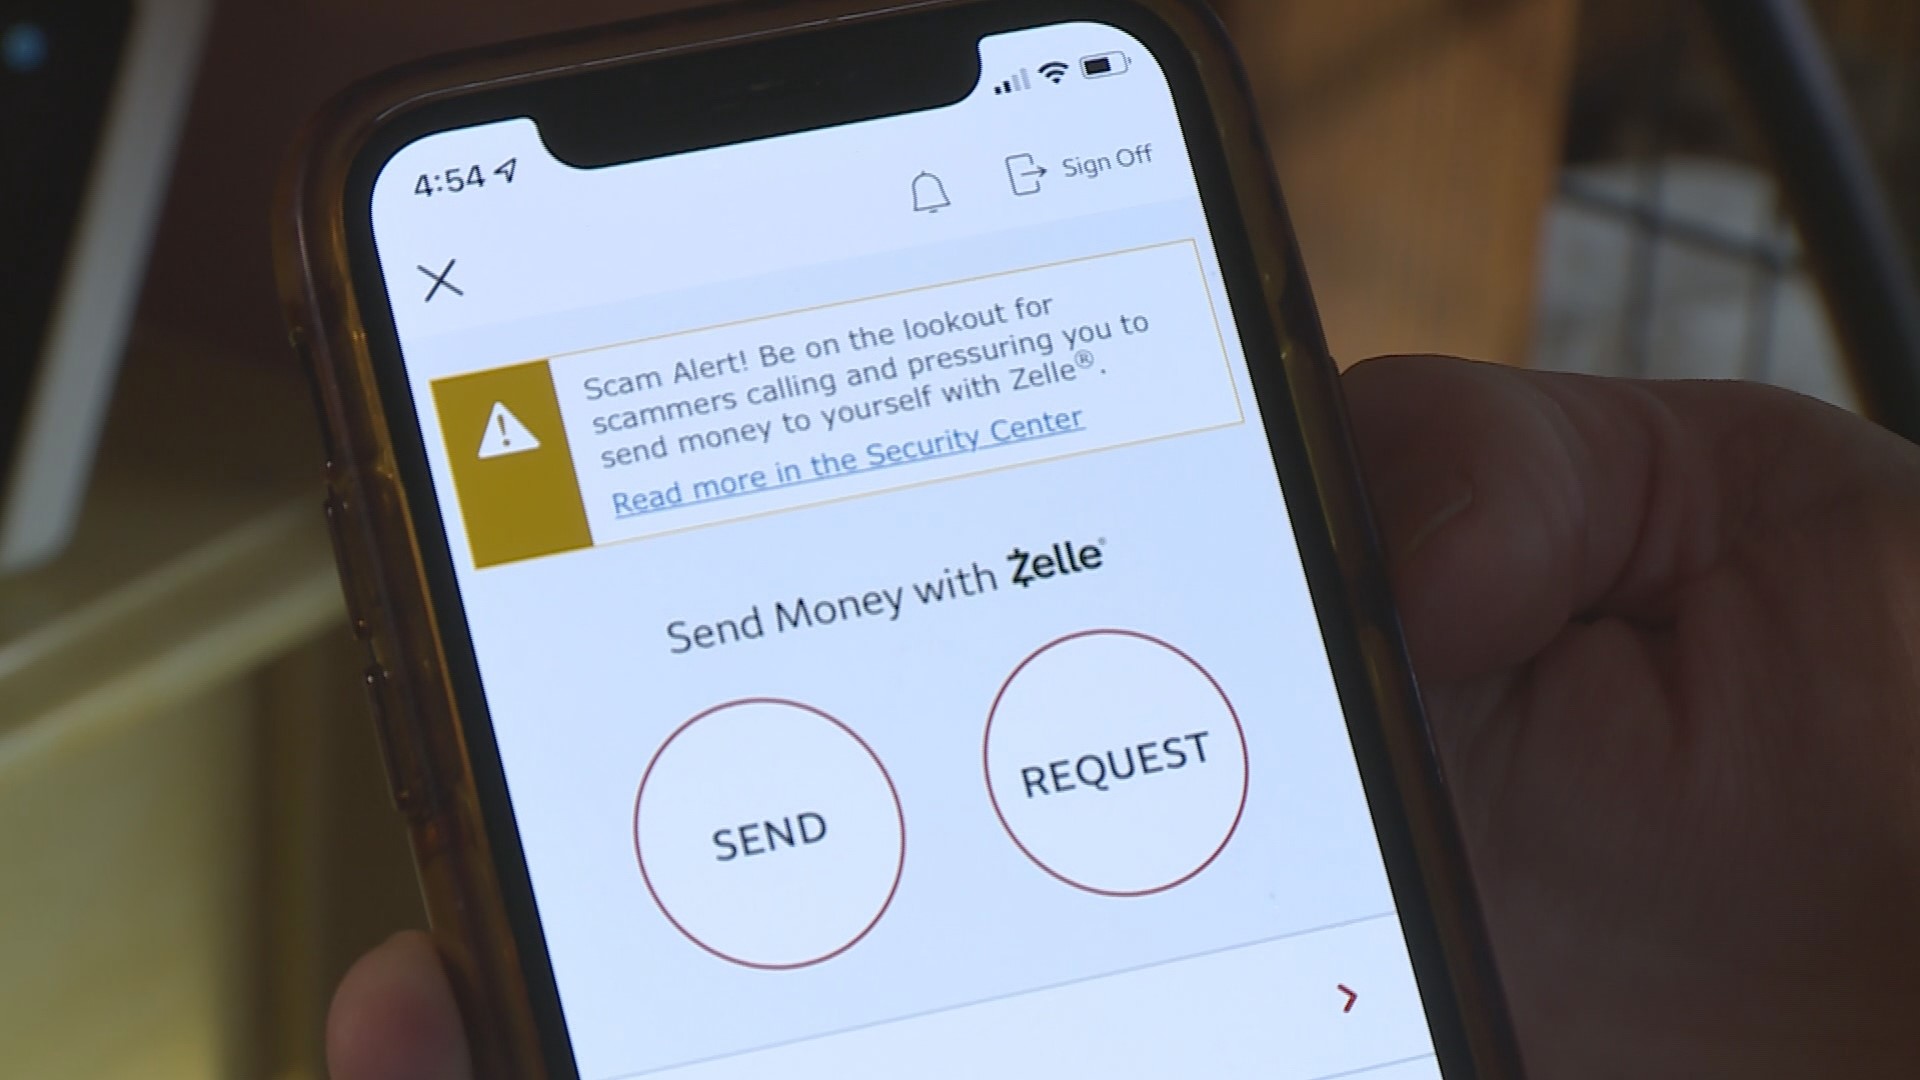 A Valley man lost $7,500 to a scam that has been fooling people nationwide. Scammers are using a method that is disguised as your bank trying to help.